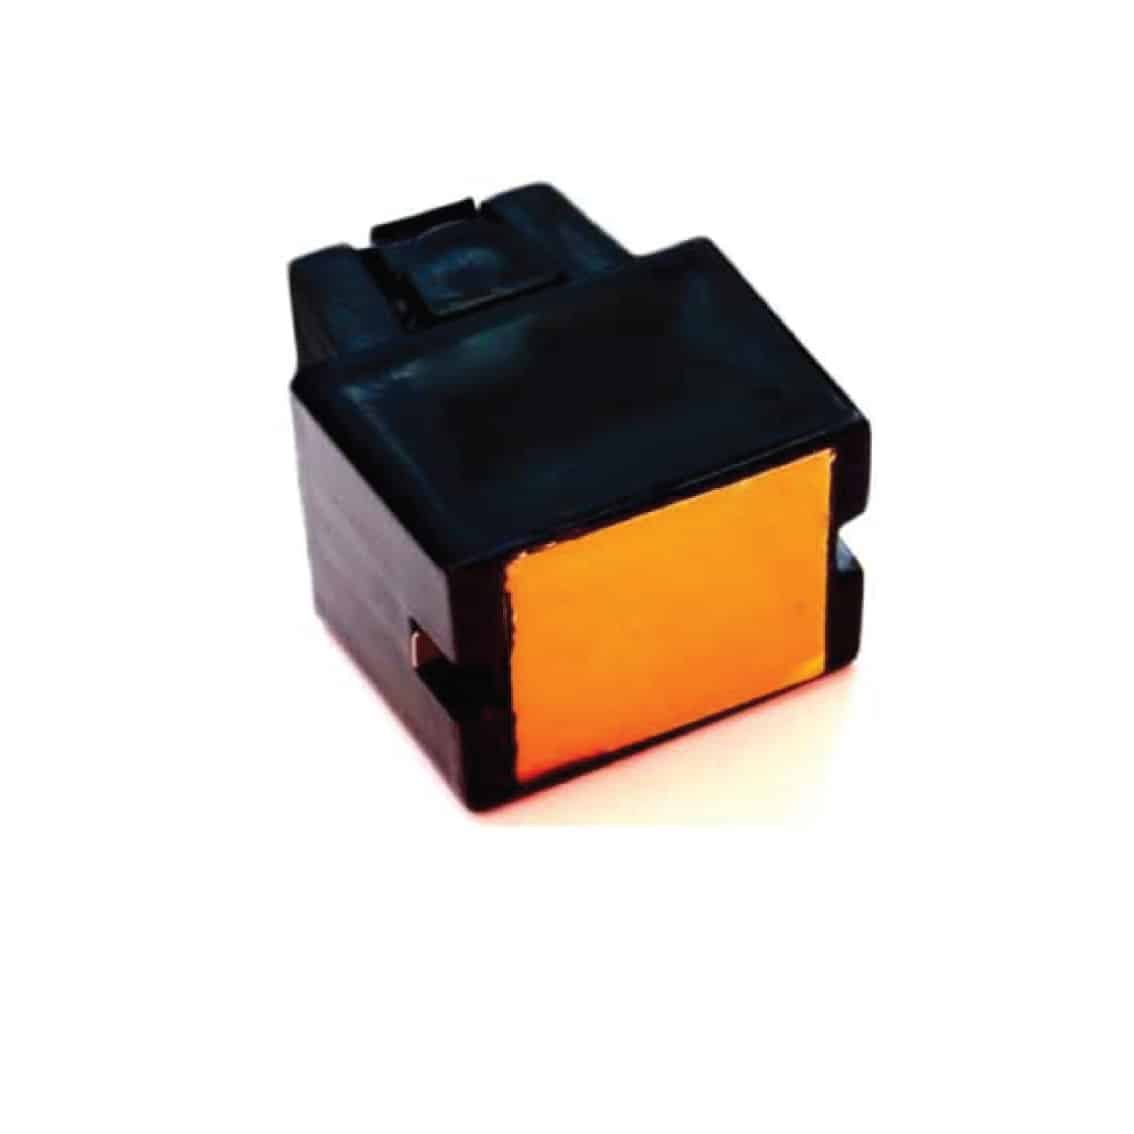 Replacement Cartridge for Taser